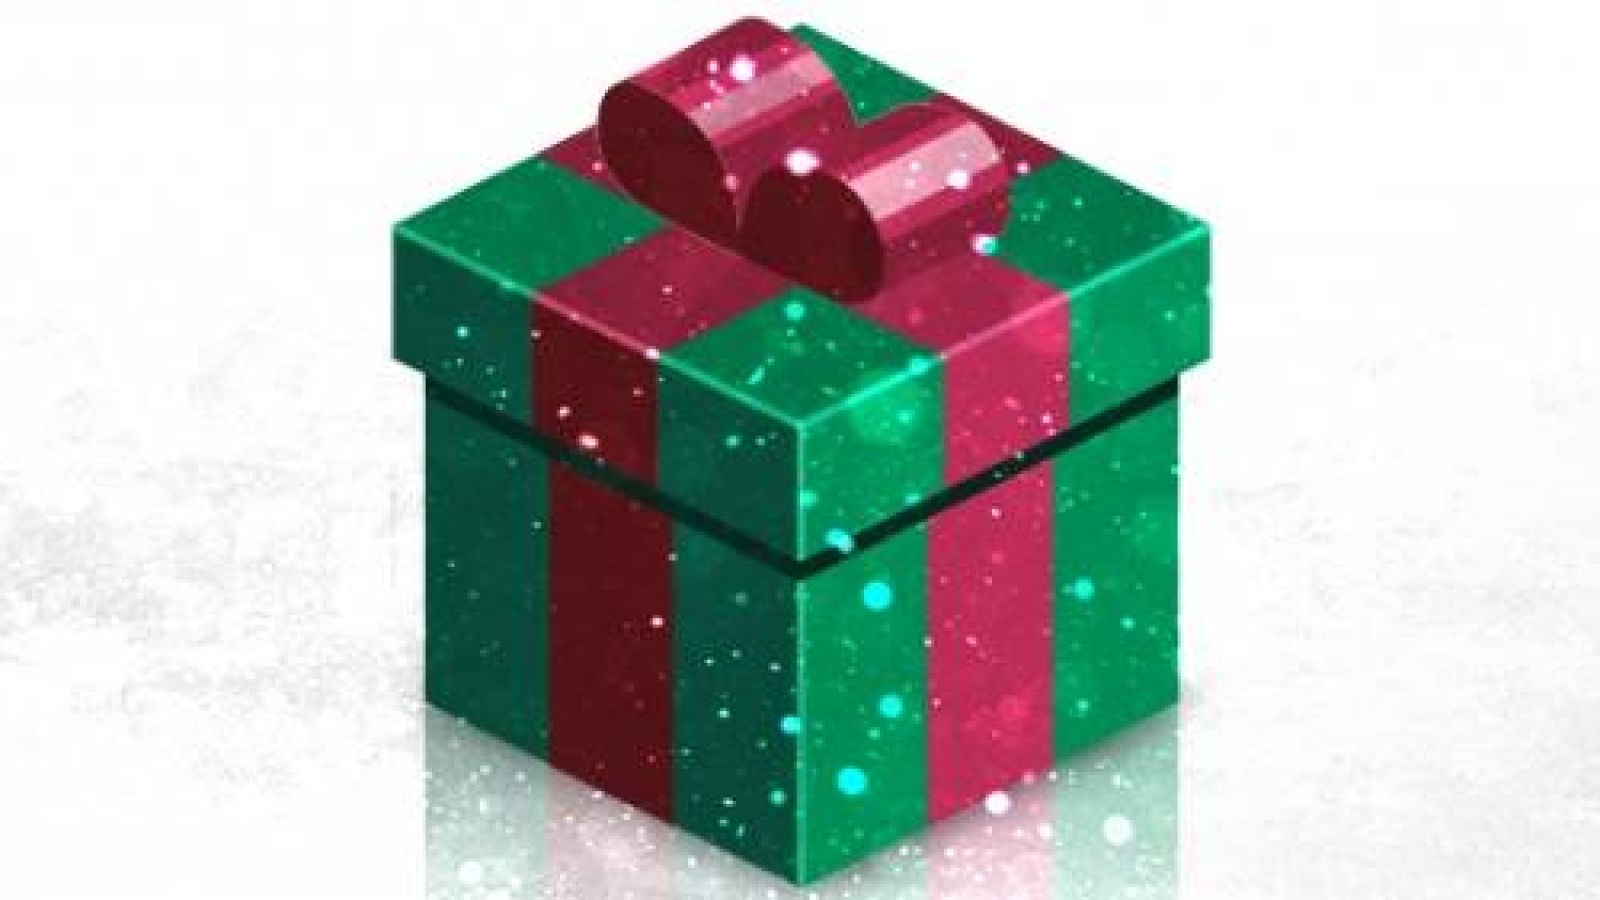 GIVE A GIFT IN WARFRAME! 